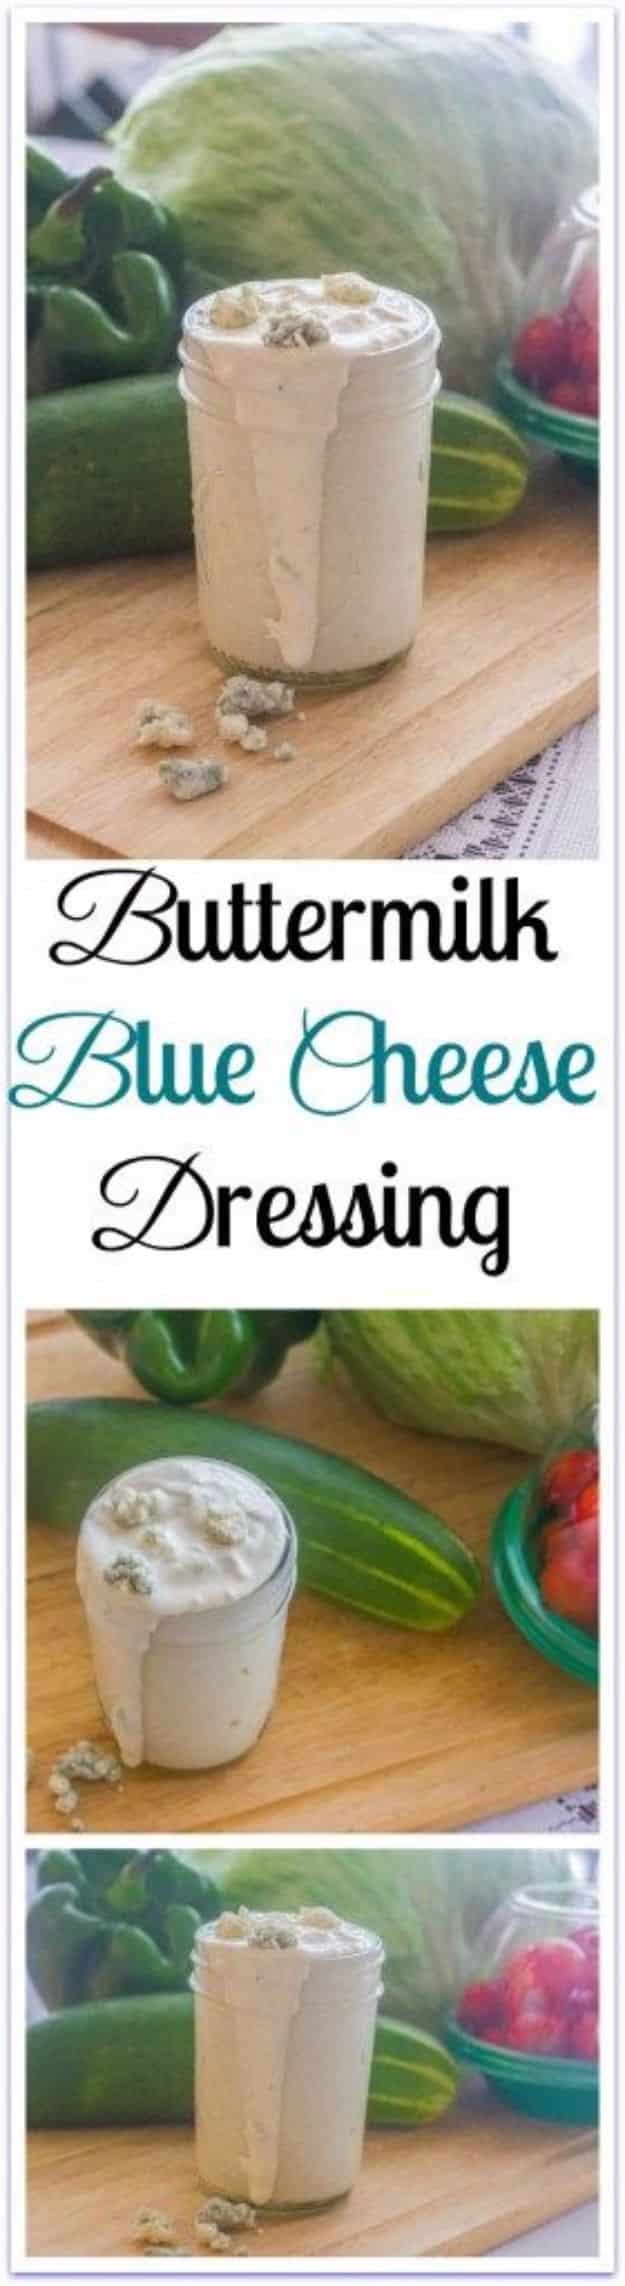 Salad Dressing Recipes - Buttermilk Blue Cheese Dressing - Healthy, Low Calorie and Easy Recipes for Creamy Homeade Dressings - How To Make Vinaigrette, Mango, Greek, Paleo, Balsamic, Ranch, and Italian Copycat Dressings 